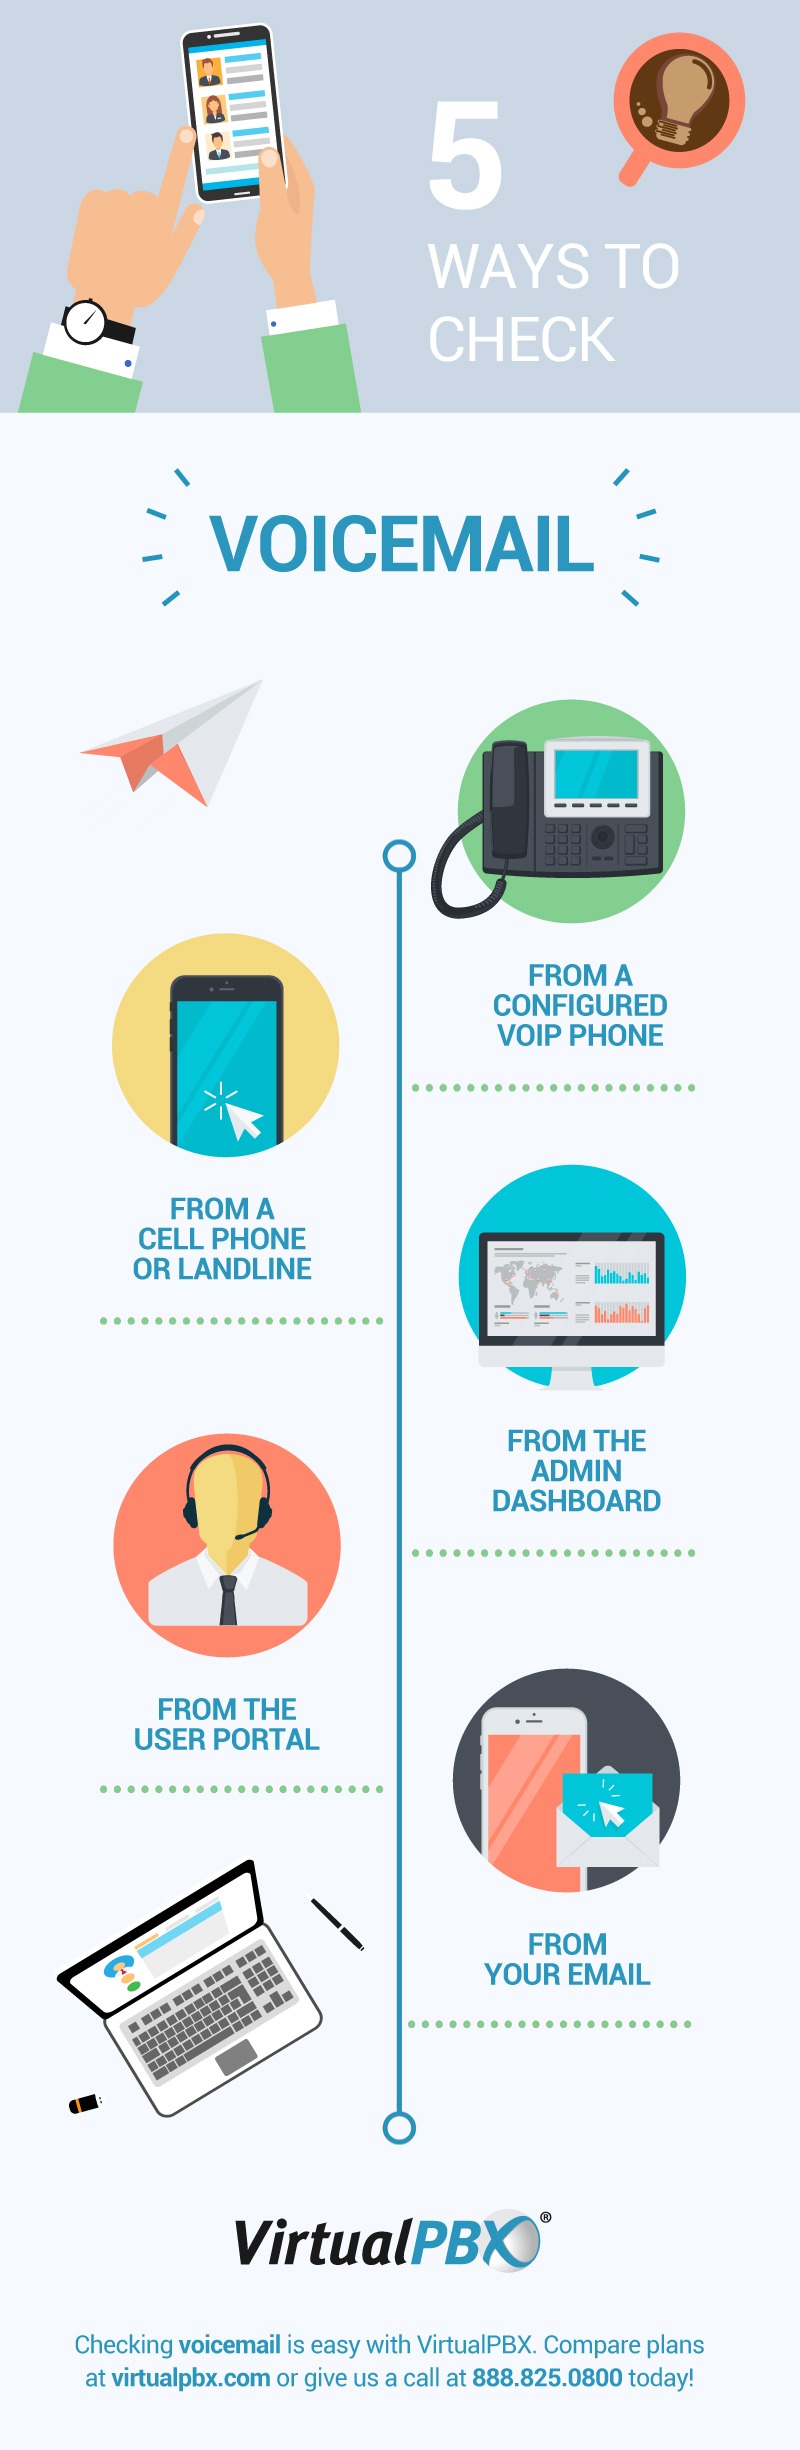 5 Ways How to Check Voicemail – VirtualPBX Infographic